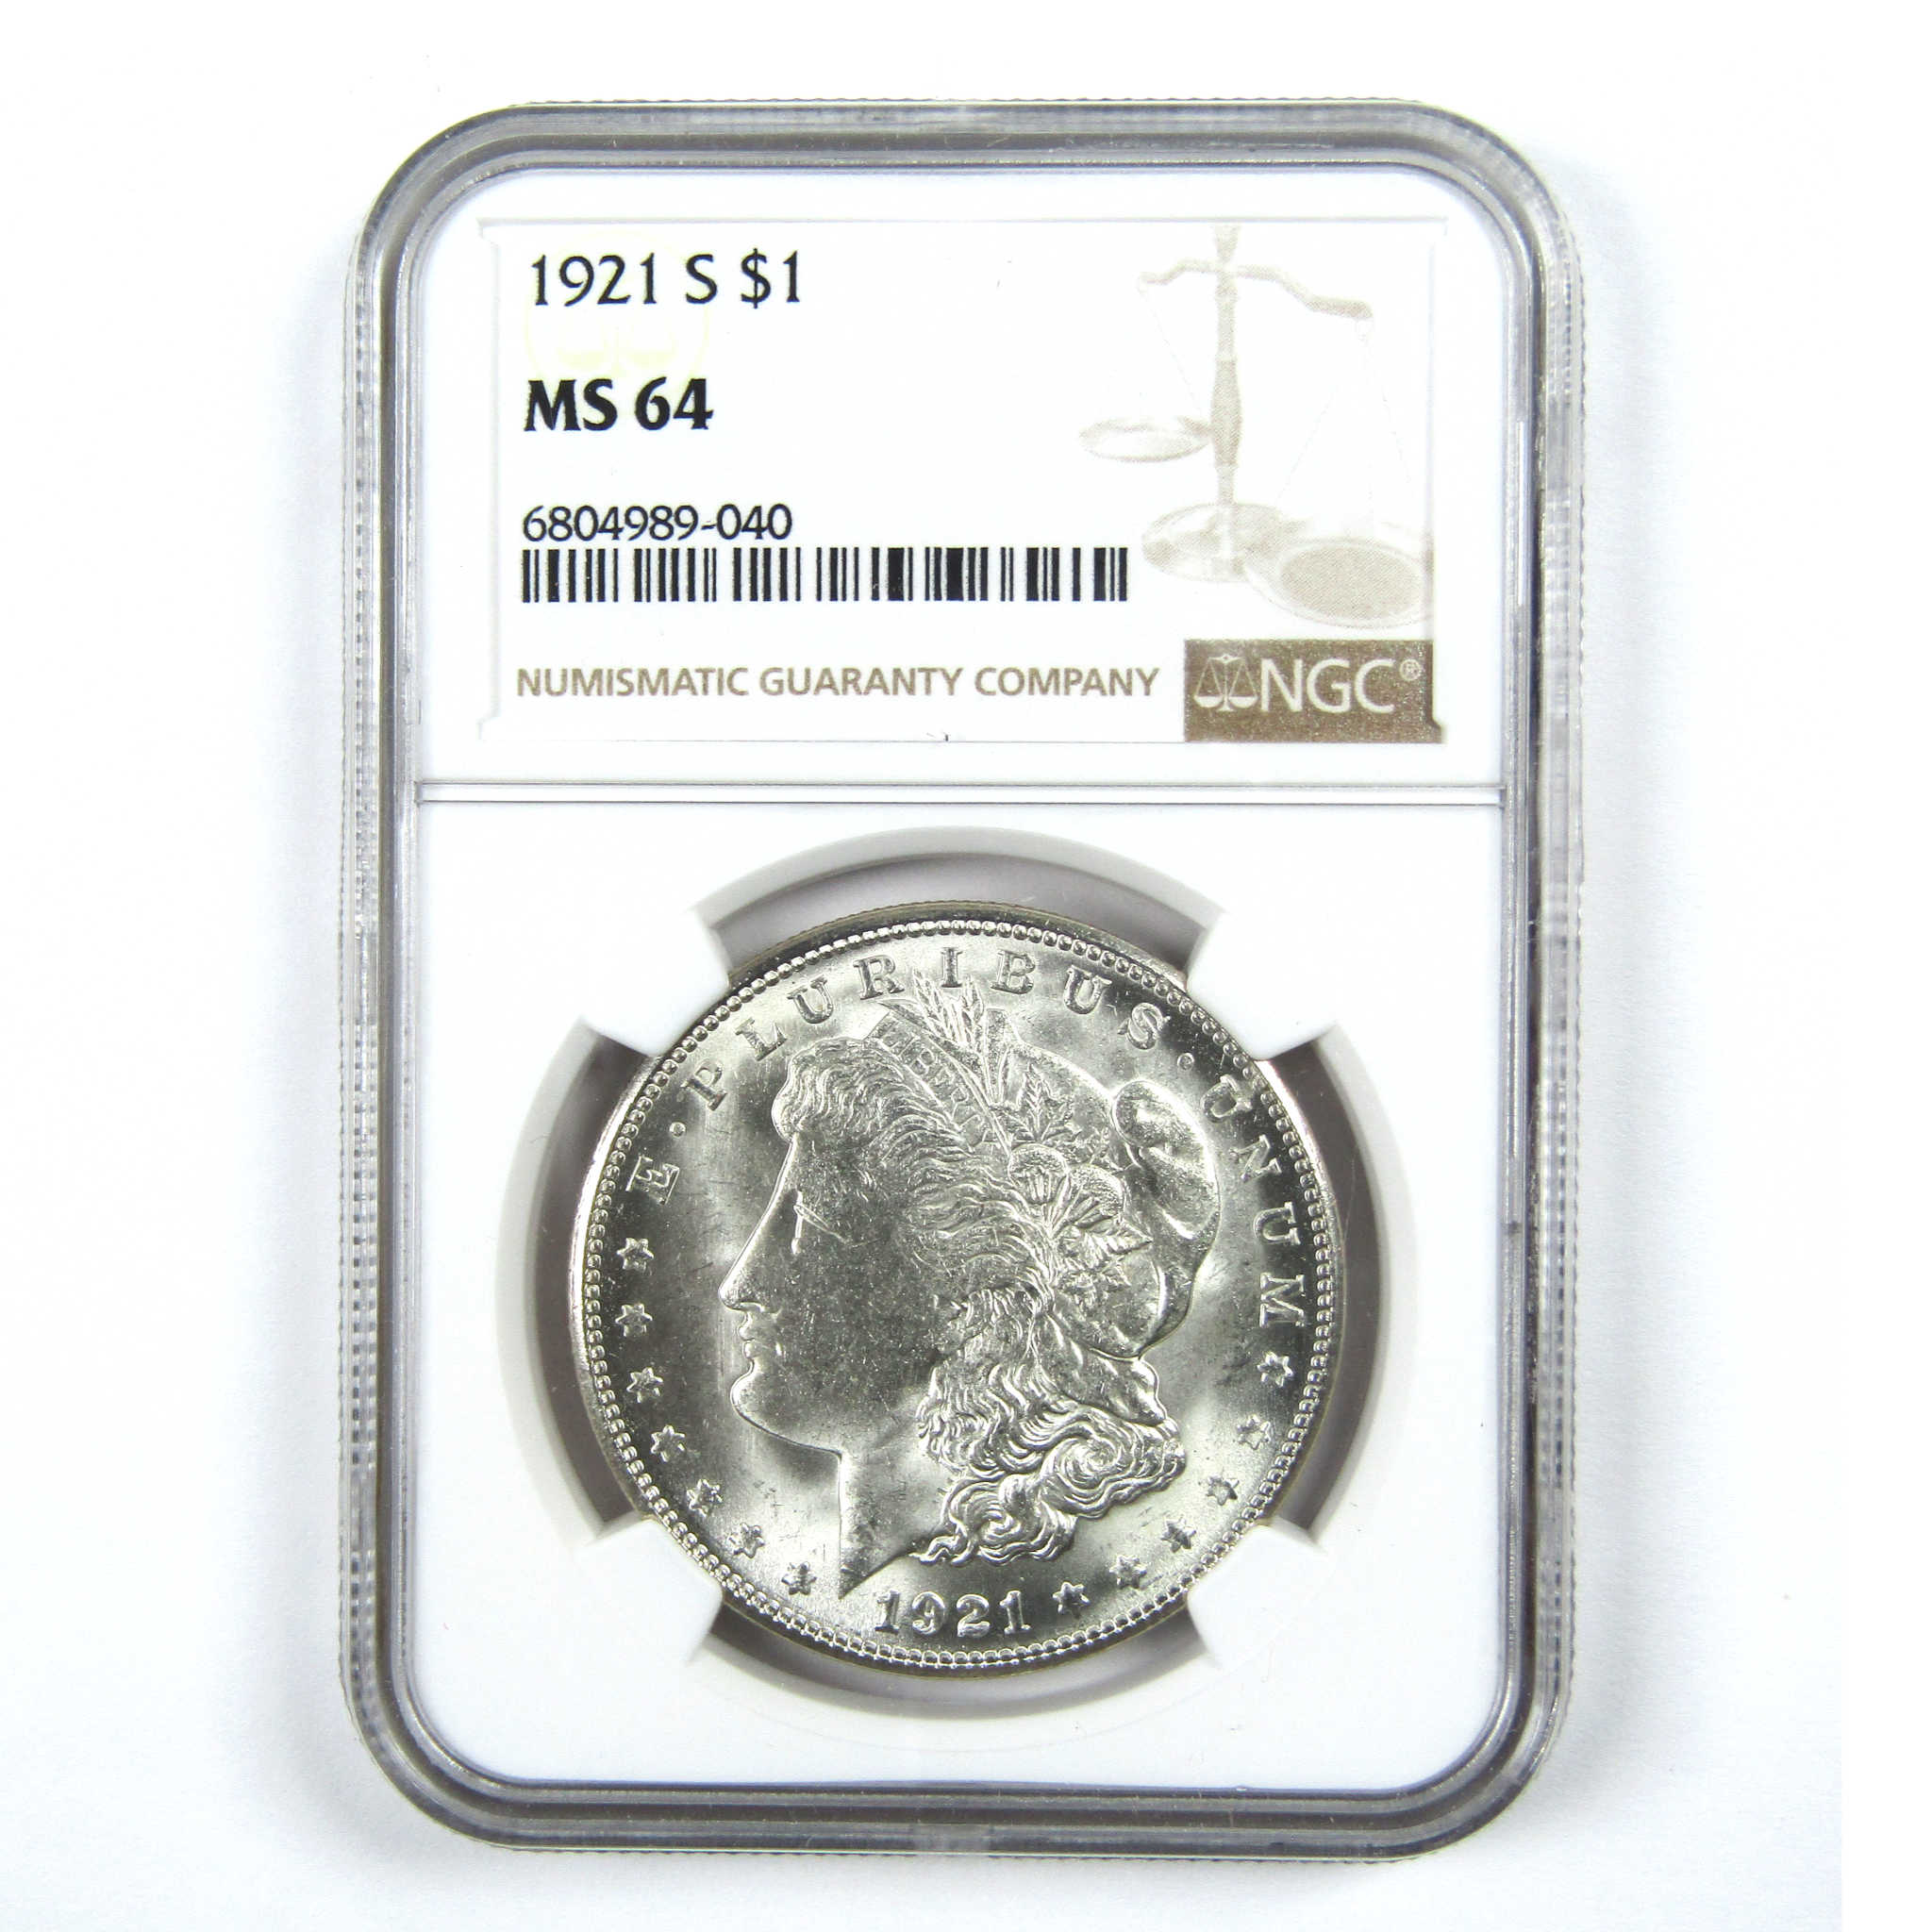 1921 S Morgan Dollar MS 64 NGC Silver $1 Uncirculated Coin SKU:I12818 - Morgan coin - Morgan silver dollar - Morgan silver dollar for sale - Profile Coins &amp; Collectibles